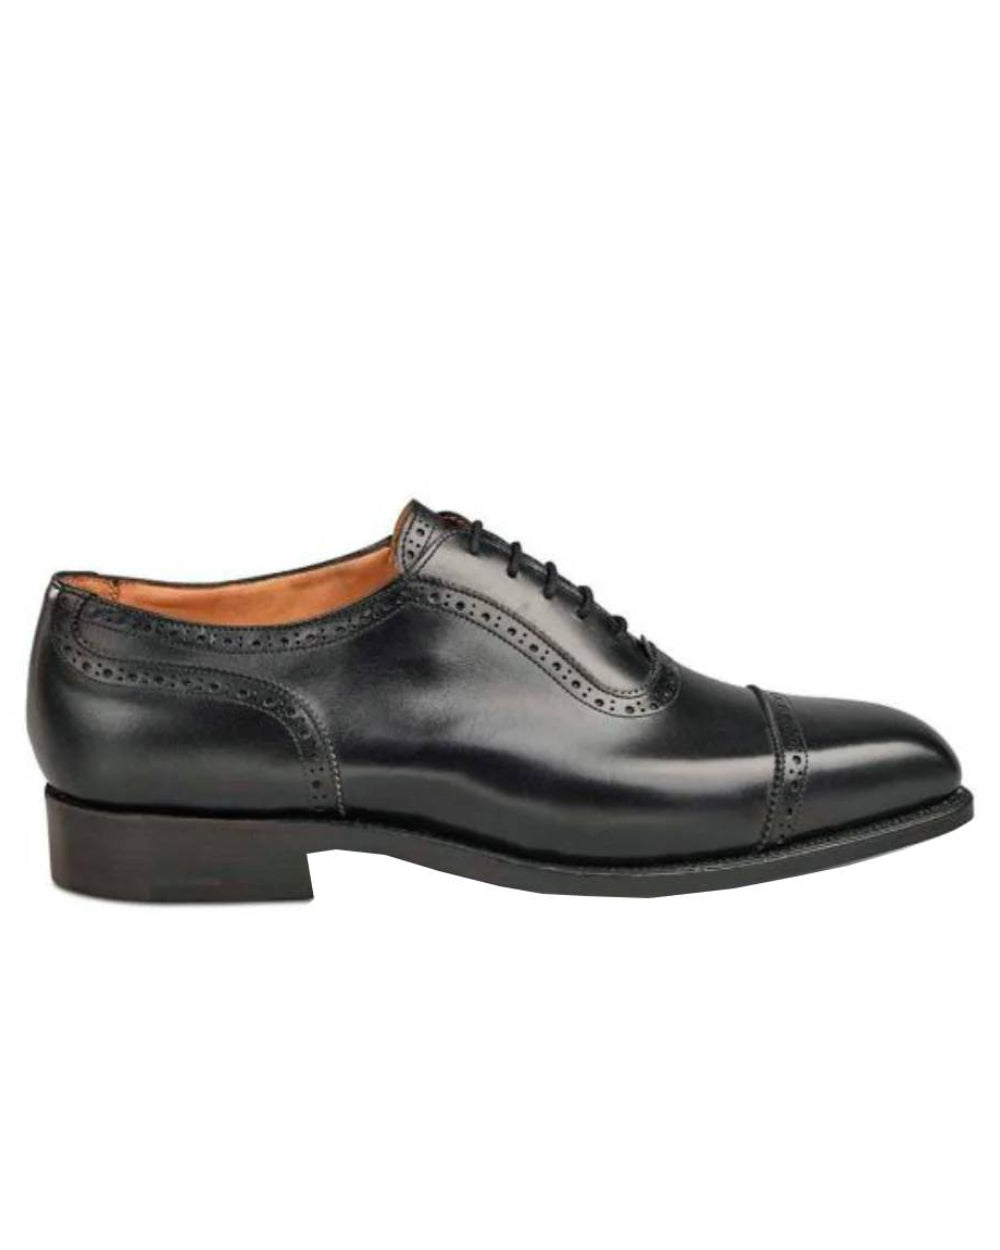 Black Coloured Trickers Belgrave Toecap Oxford City Shoe On A White Background 